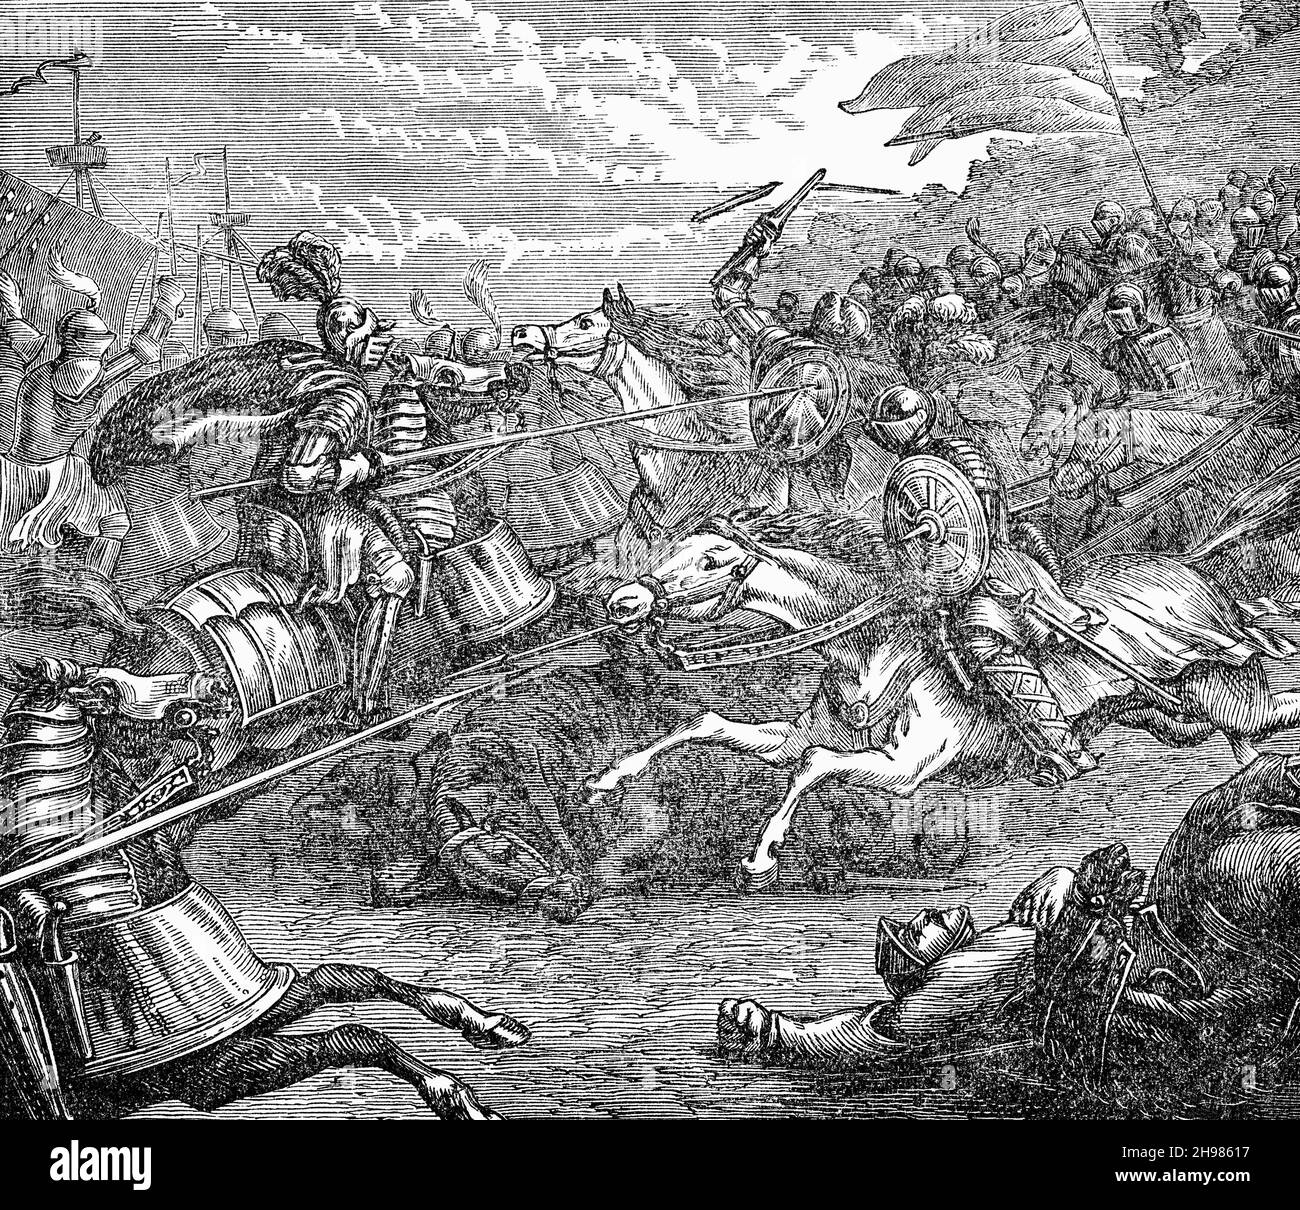 A late 19th Century illustration of the Battle of Pinkie, aka the Battle of Pinkie Cleugh, that took place on 10 September 1547 on the banks of the River Esk near Musselburgh, Scotland. It was the last pitched battle between Scotland and England before the Union of the Crowns, part of the conflict known as the Rough Wooing and is considered to have been the first modern battle in the British Isles. Stock Photo